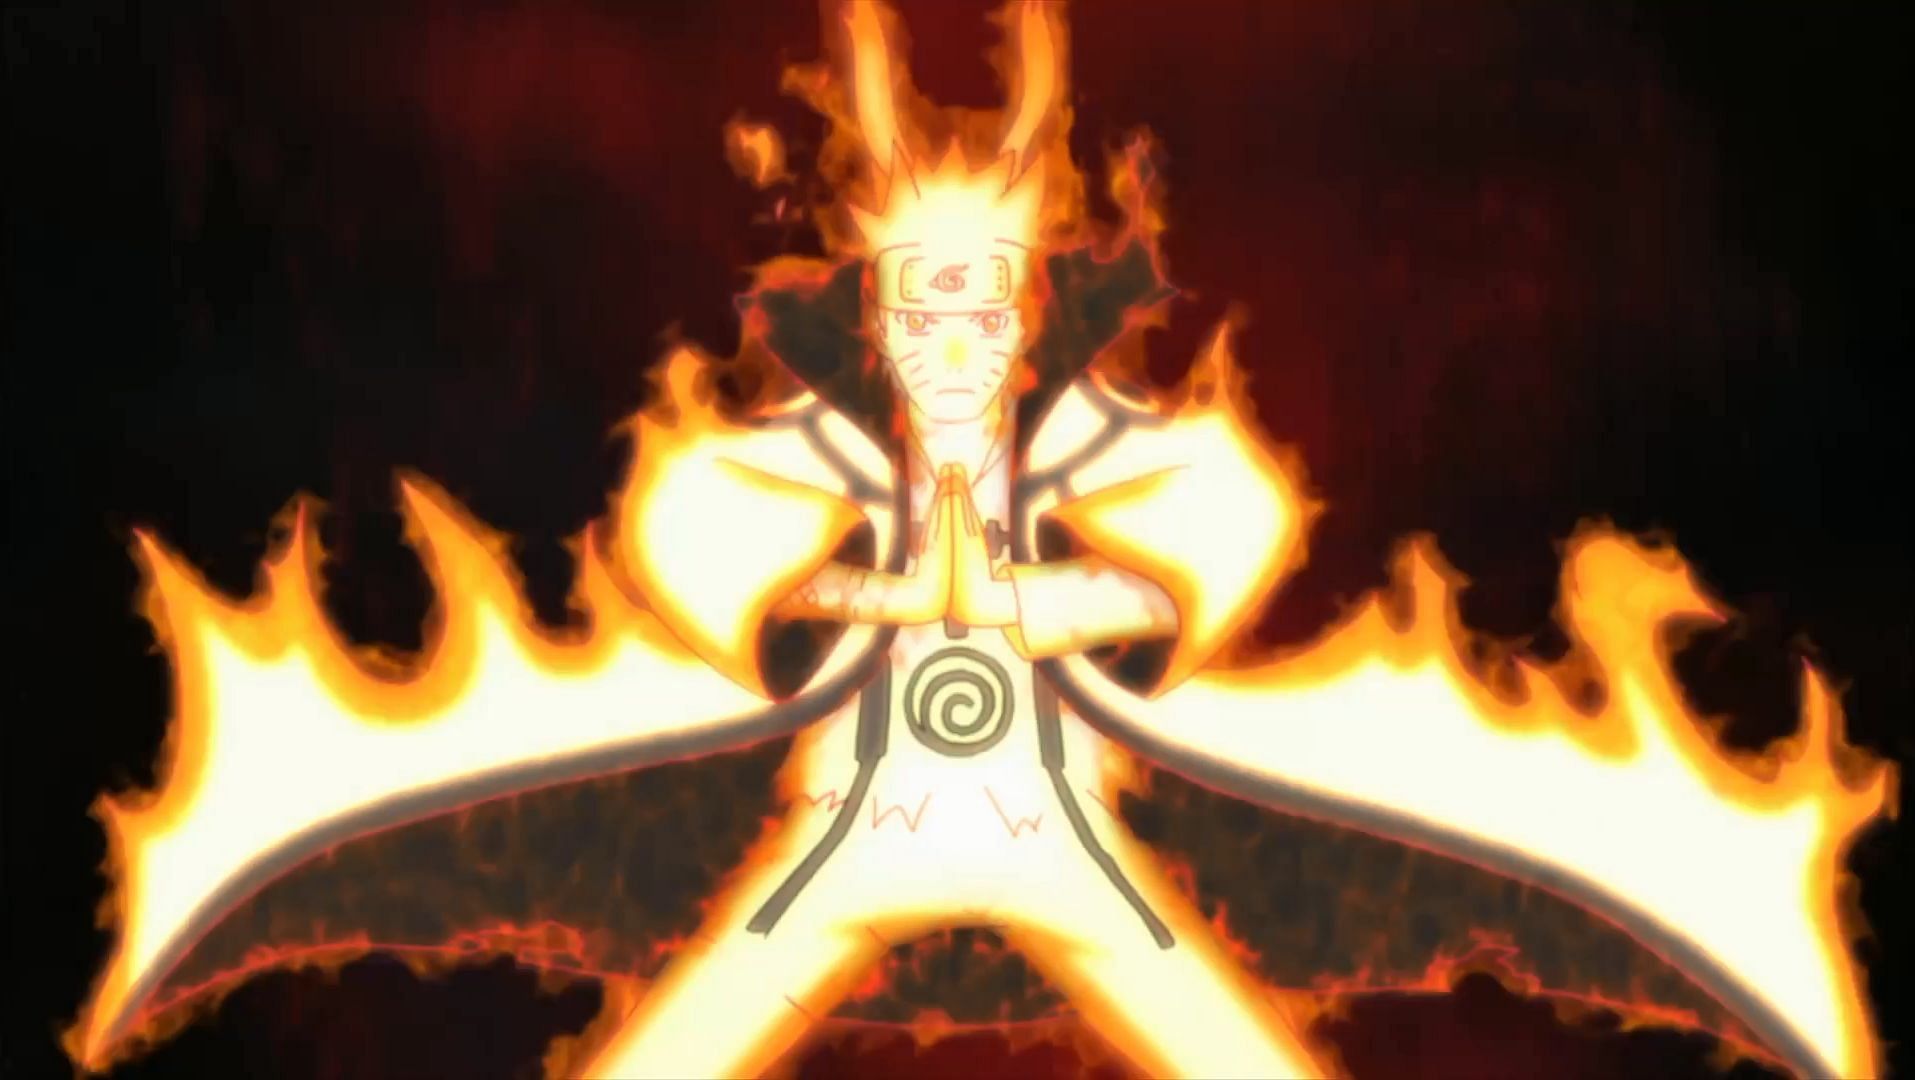 Naruto in the Nine-Tails Chakra mode as seen in the Shippuden series (Image via Studio Pierrot)